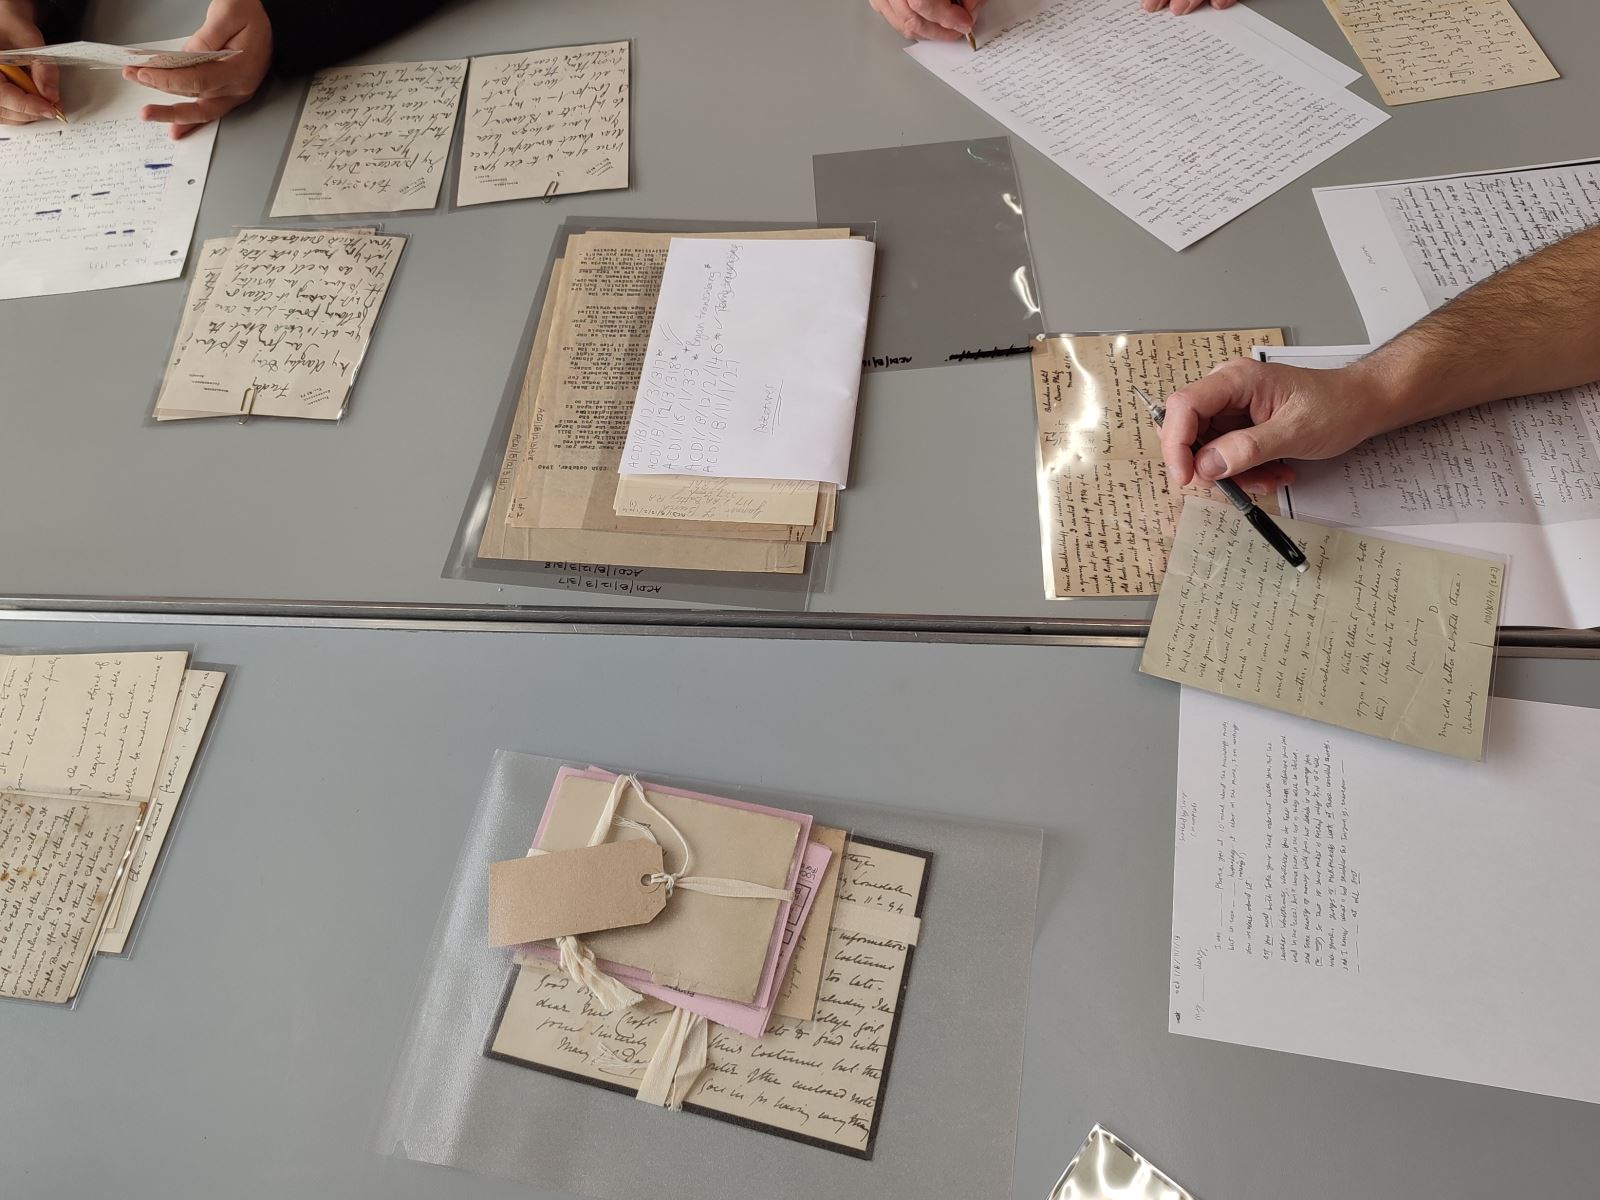 3 People writing out copies of letters from the Conan Doyle Collection